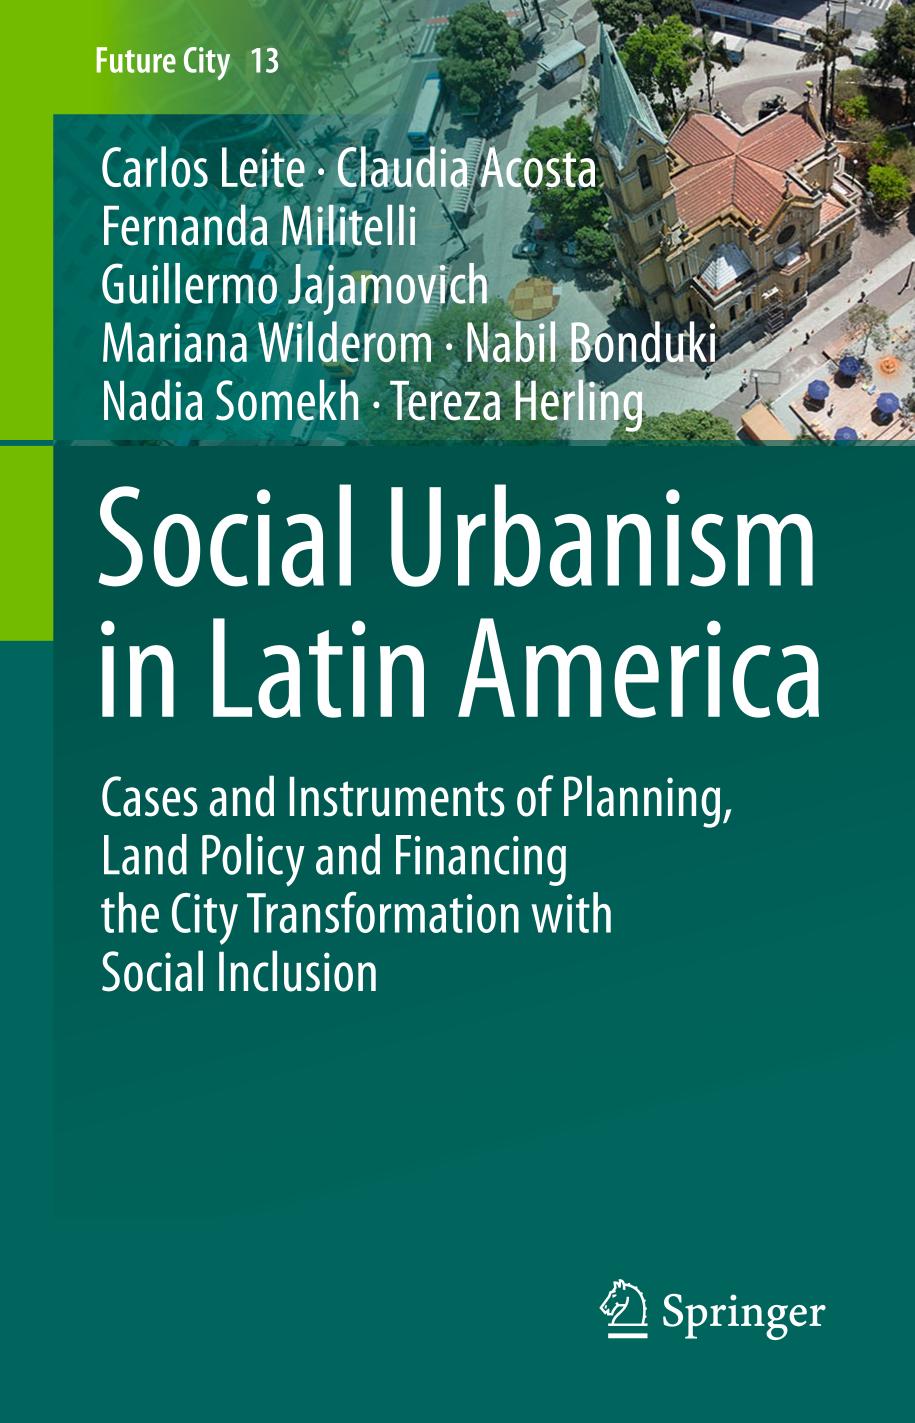 Social Urbanism in Latin America : Cases and Instruments of Planning, Land Policy and Financing the City Transformation with Social Inclusion